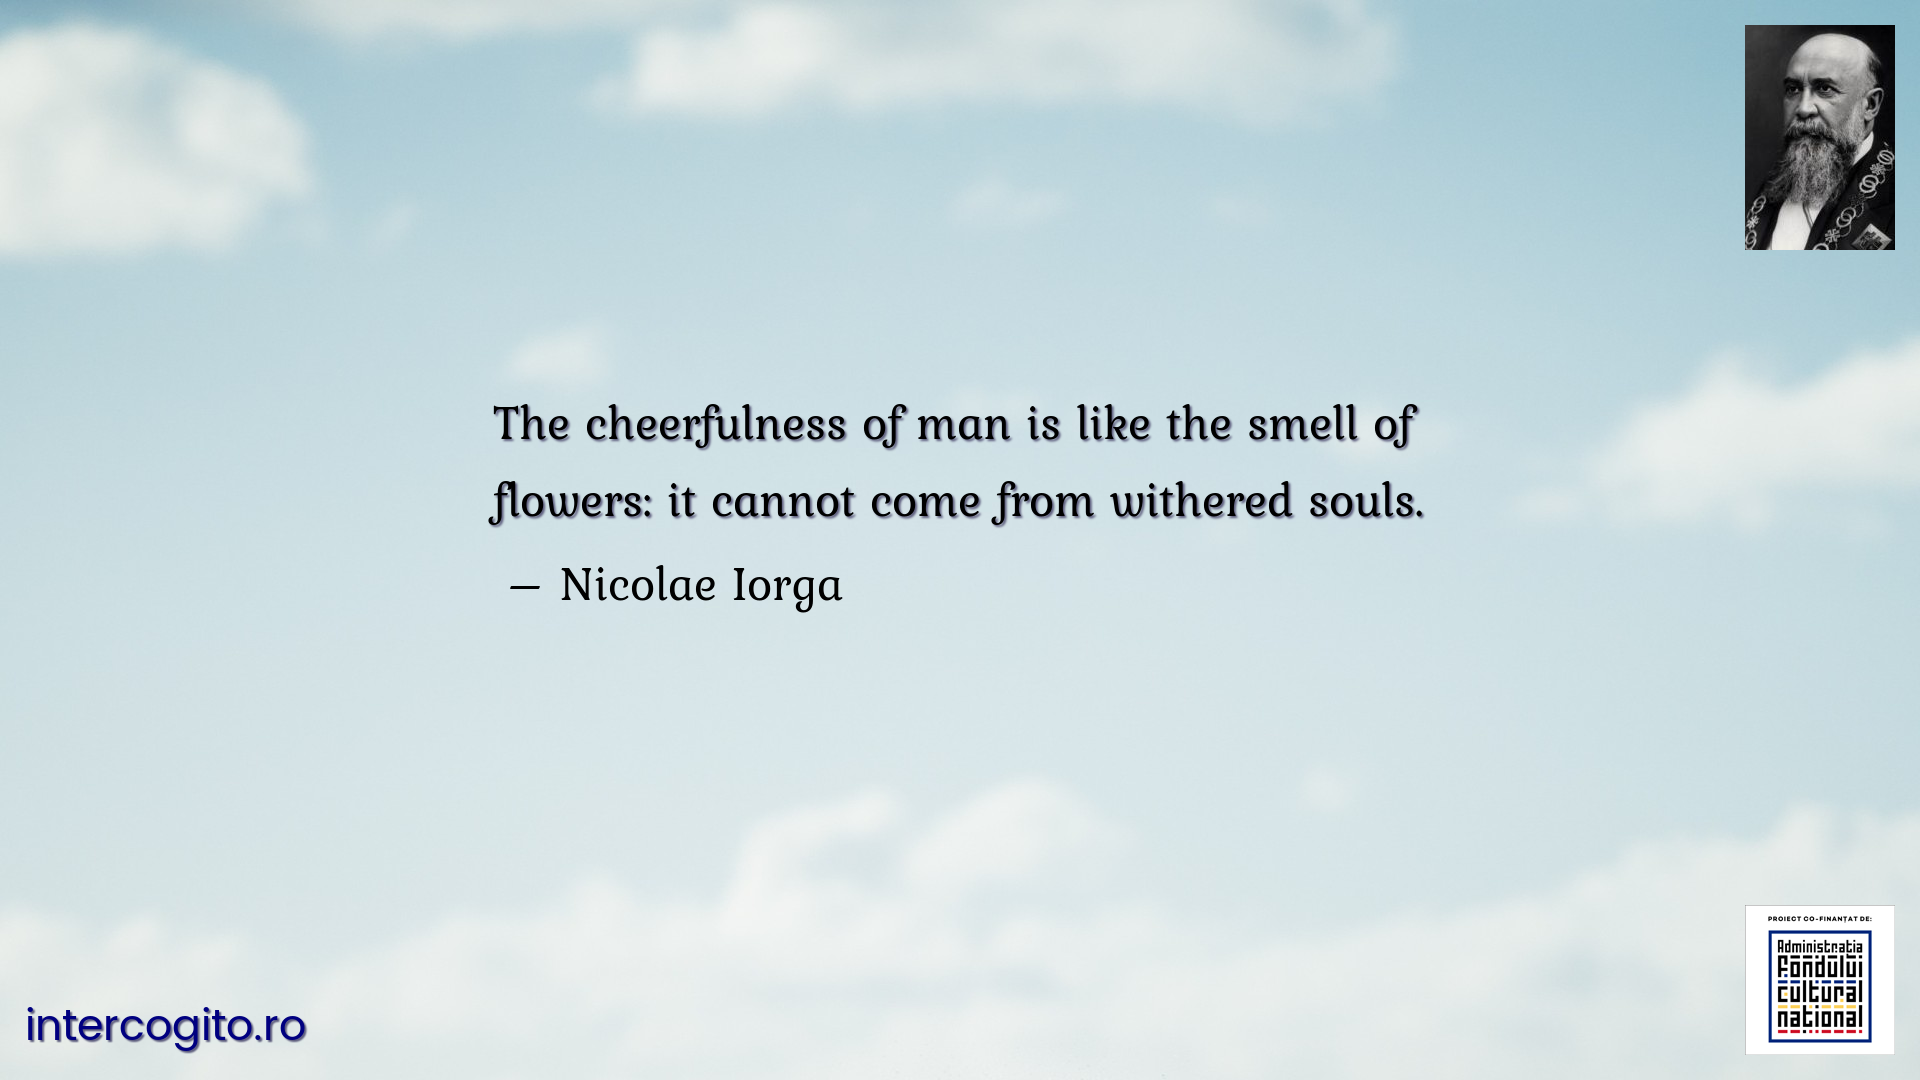 The cheerfulness of man is like the smell of flowers: it cannot come from withered souls.